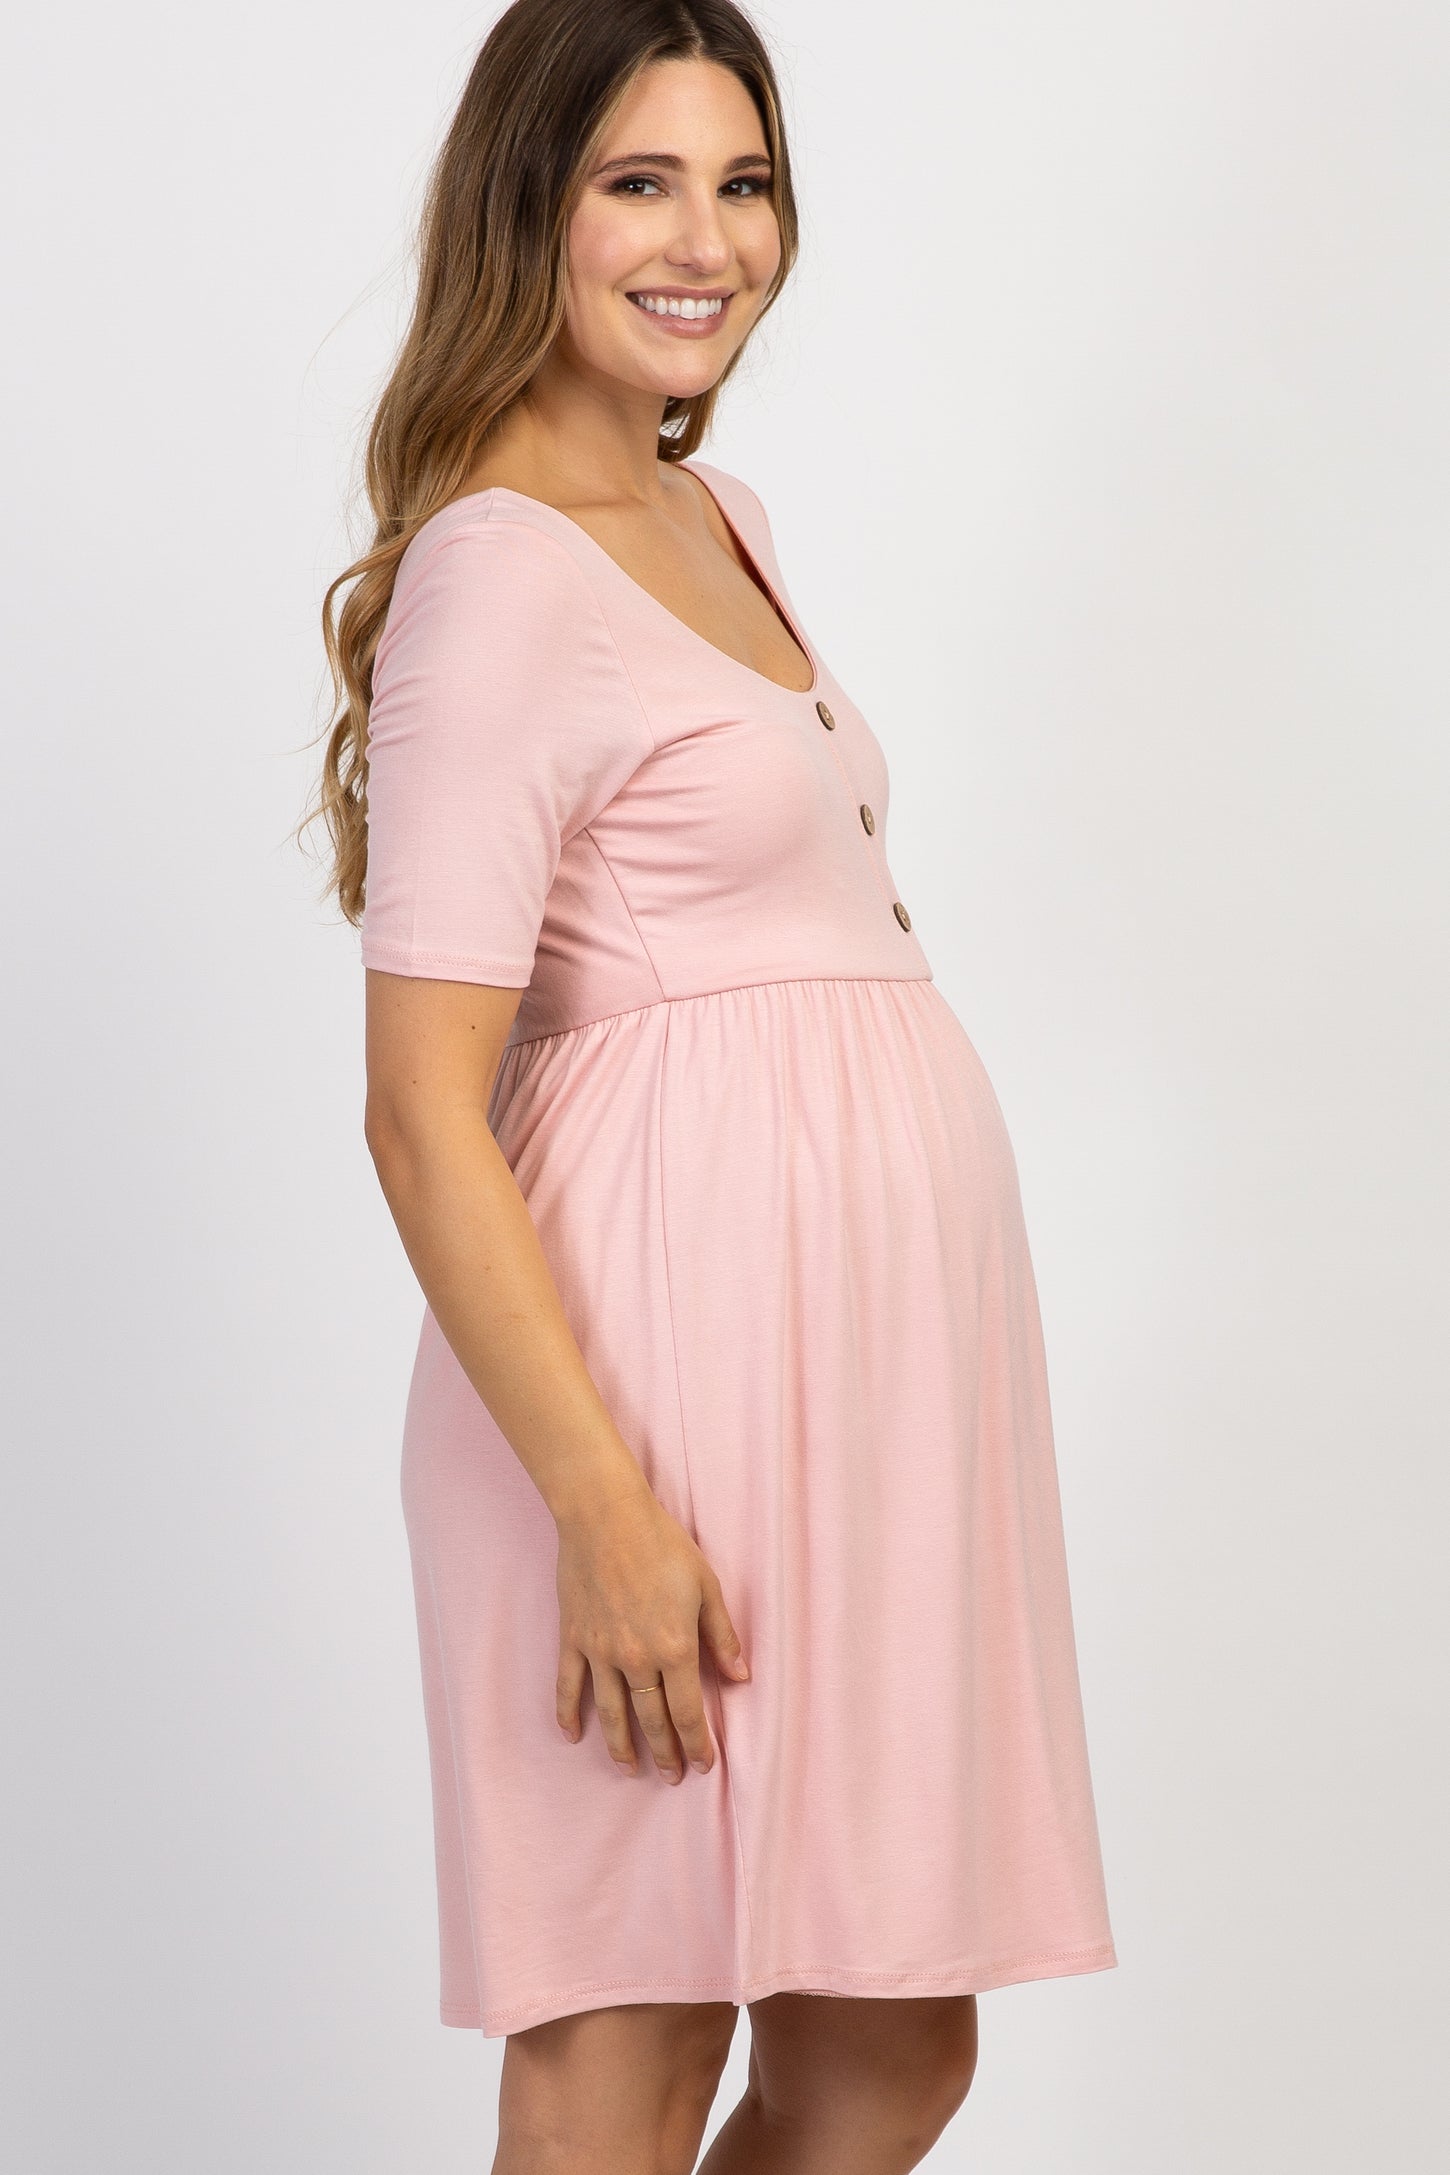 PinkBlush Pink Solid Button Front Maternity Dress